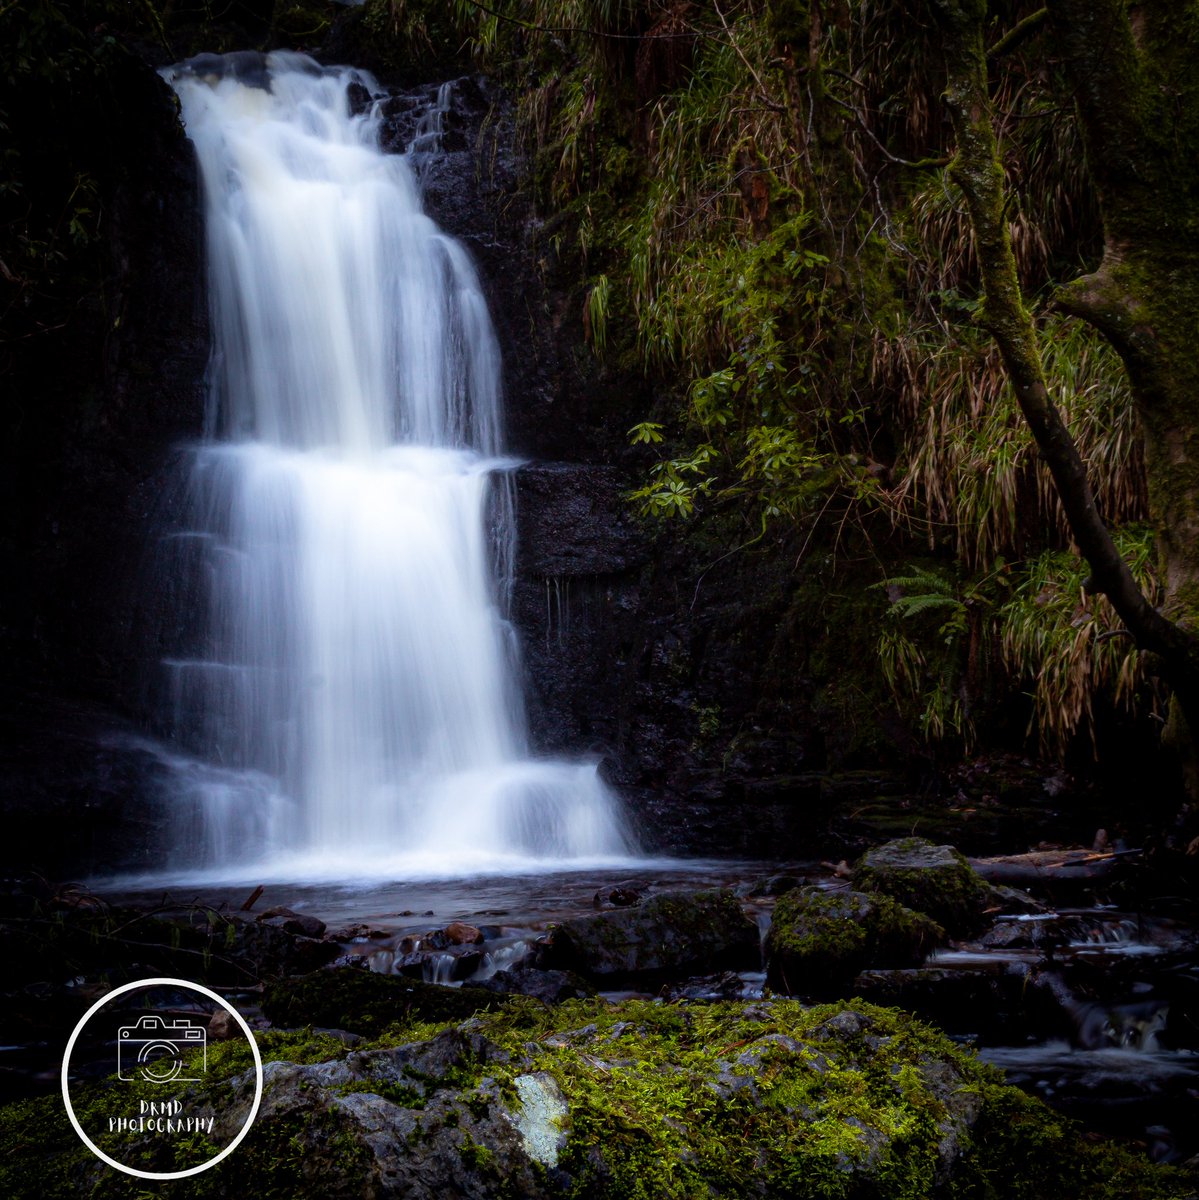 Back at Nant Y Ffrith. Such a peaceful place, and a pretty epic waterfall!!

#landscapeoftheday #landscape_capture #landscapephotos #landscapes 
 #landscape_captures  #landscape_lovers  #bestukpics  #explore_britain_ #gloriousbritain #ukscenery #topukphoto #scenicbritain
#igshotz